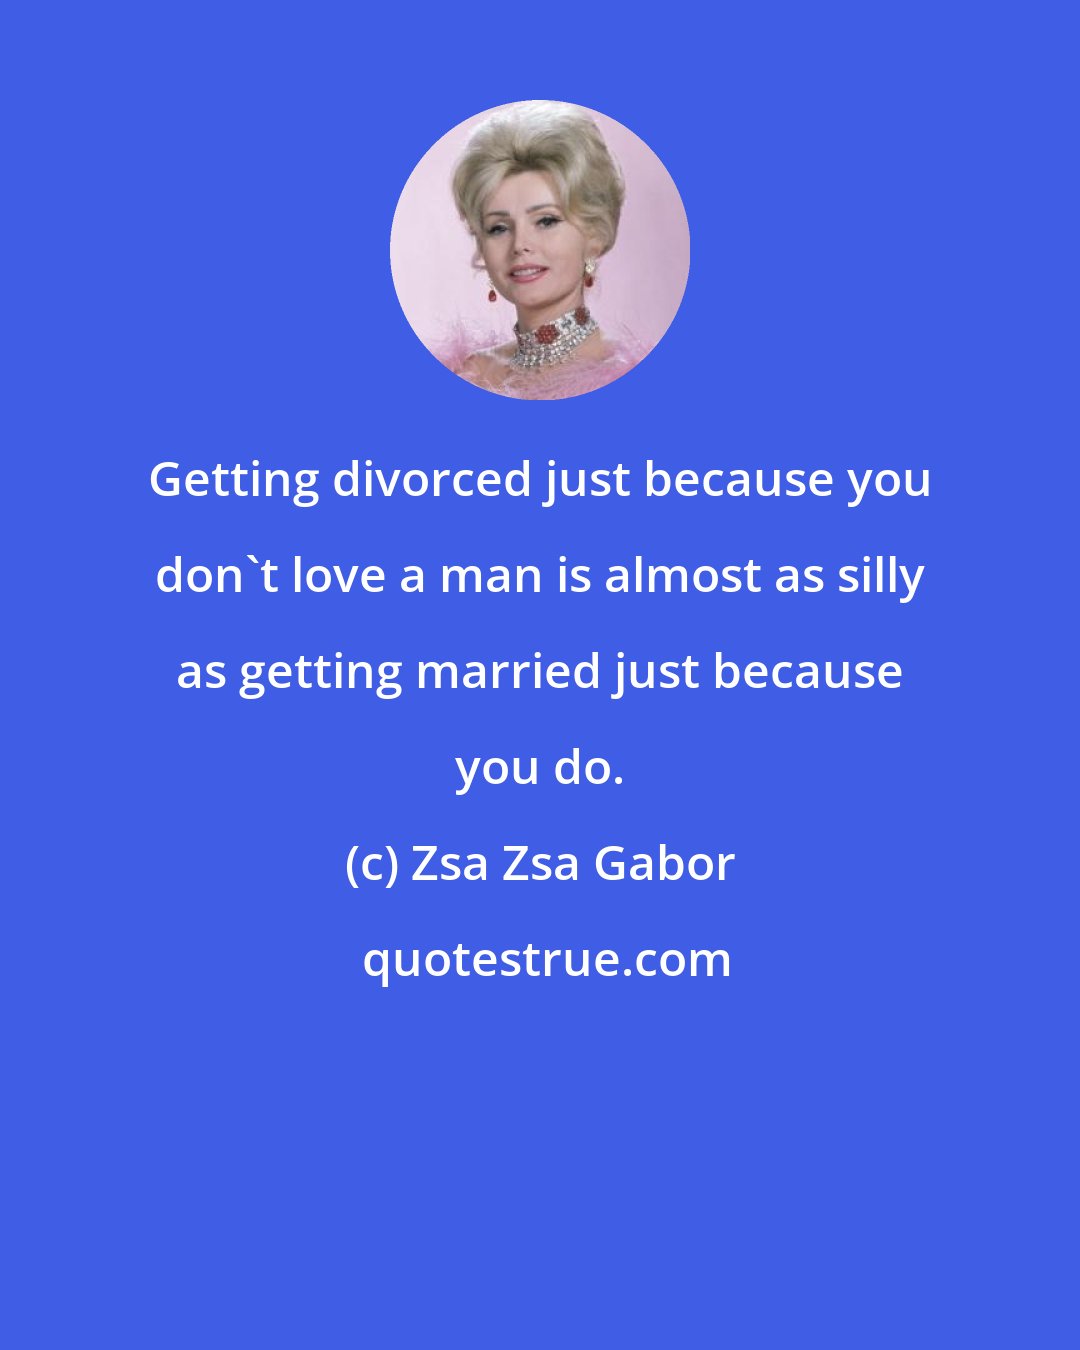 Zsa Zsa Gabor: Getting divorced just because you don't love a man is almost as silly as getting married just because you do.